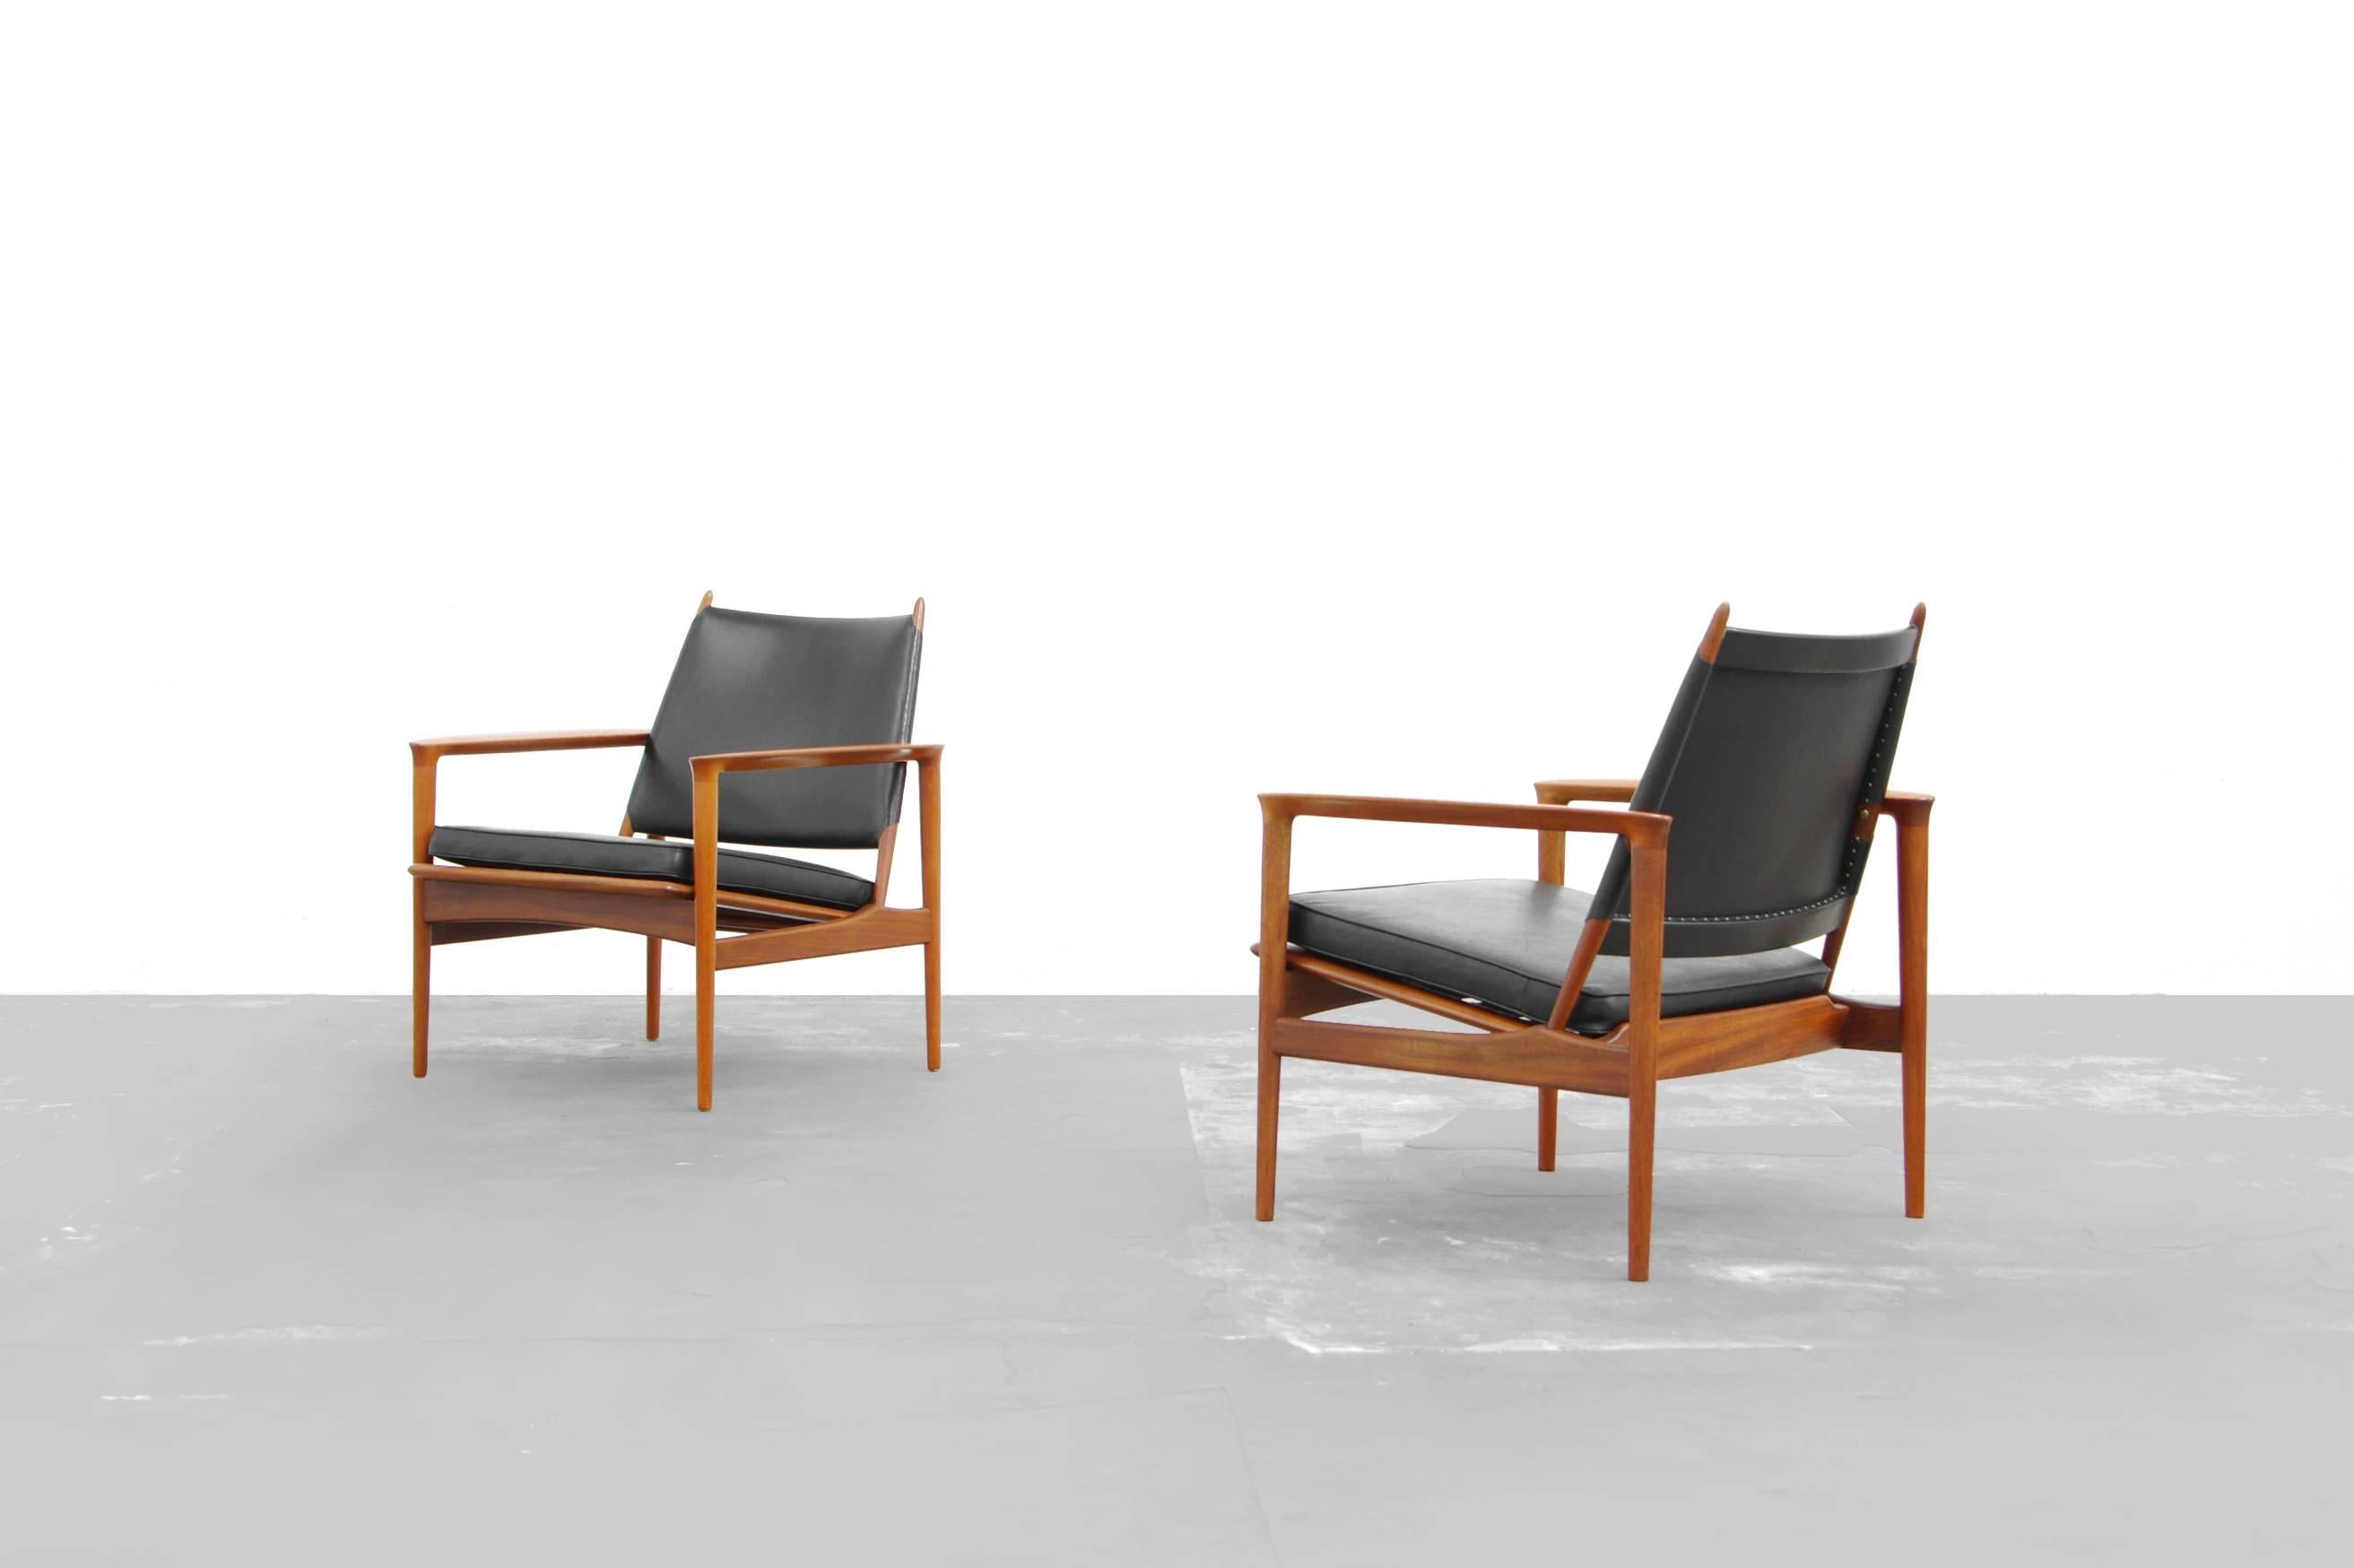 Very nice sculpted pair of easy chairs, Model Broadway by Torbjørn Afdal for Svein Bjørneng. Design of 1958. Construction teak with loosely placed pillows. Very nice original condition with charming patina.